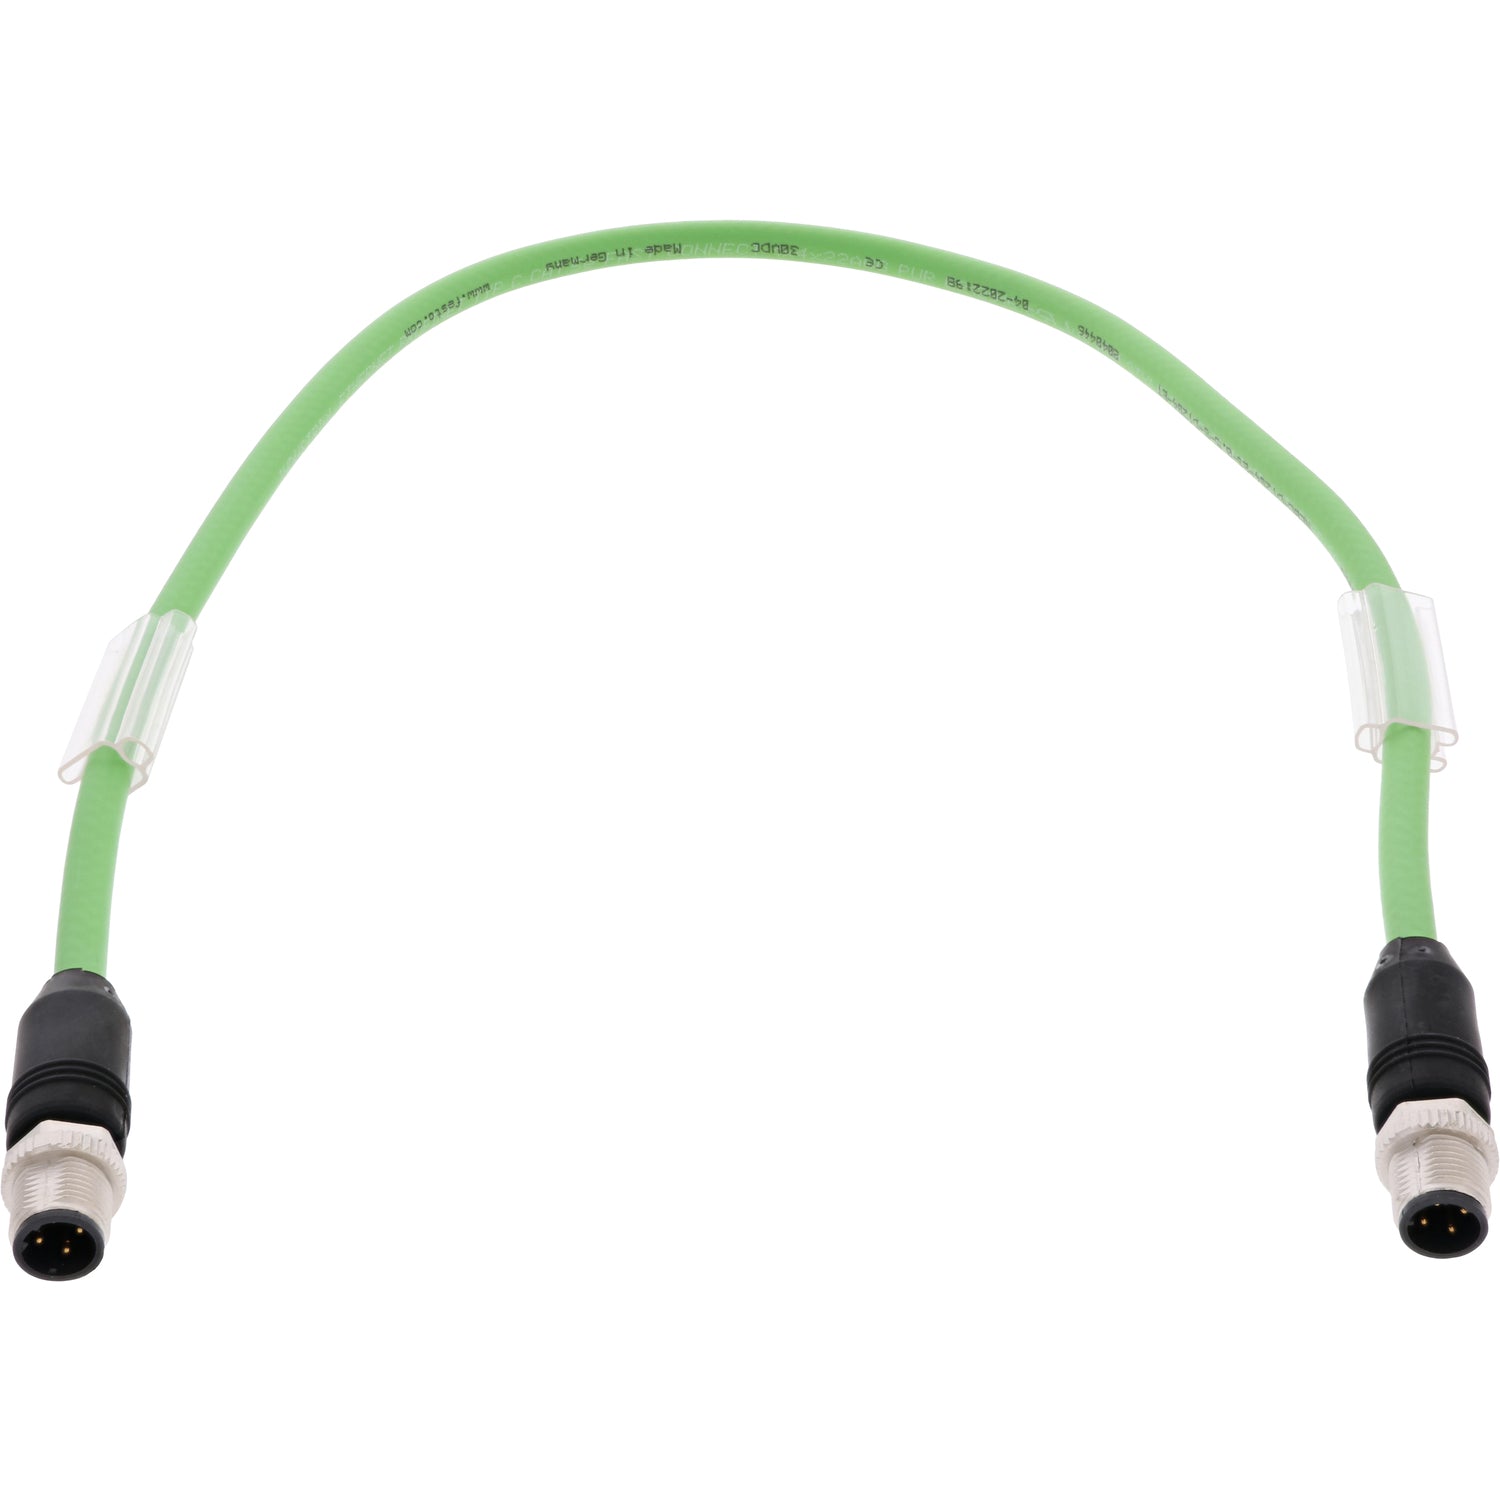 0.3 meter green connecting cable with nickel-plated, four-pin male connectors on both ends. Cable shown on white background. 